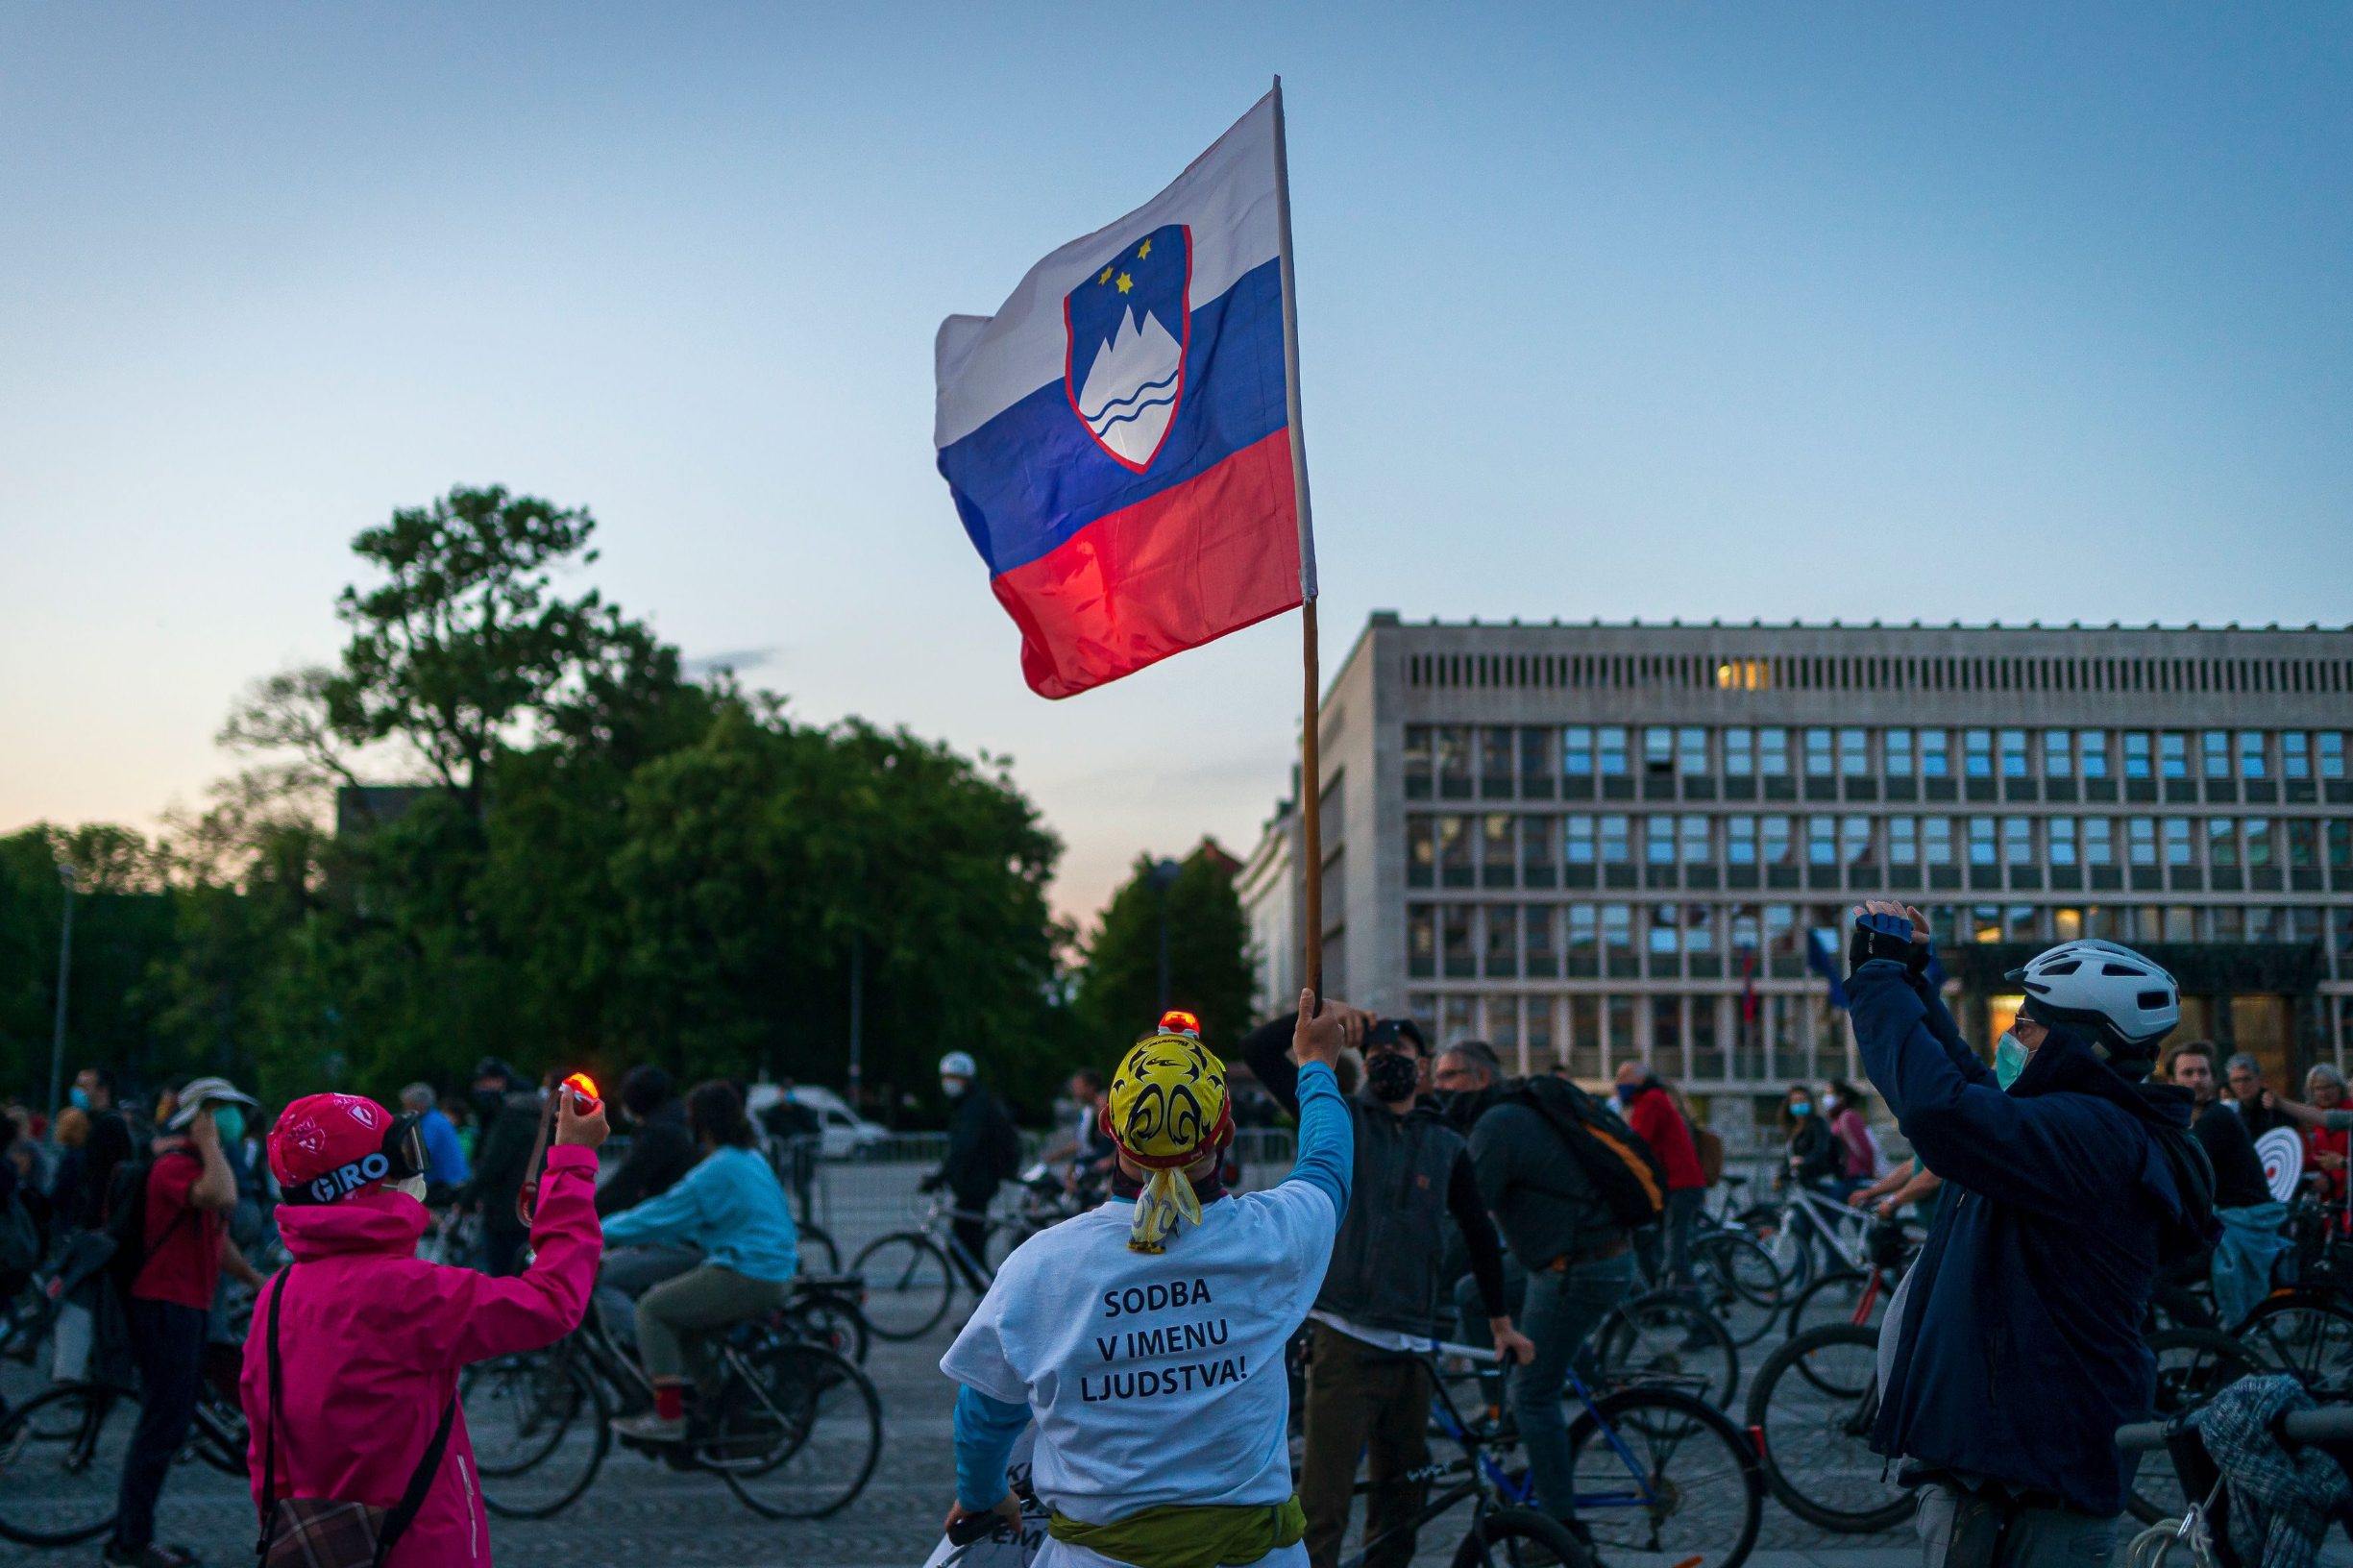 TOPSHOT - A man holds a Slovenian flag as others ride their bikes as they block the centre of capital Ljubljana to protest against the centre-right government, accusing it of corruption and of using the novel coronavirus crisis to restrict freedom on May 8, 2020 amid the COVID-19 outbreak, caused by the novel coronavirus. (Photo by Jure Makovec / AFP)